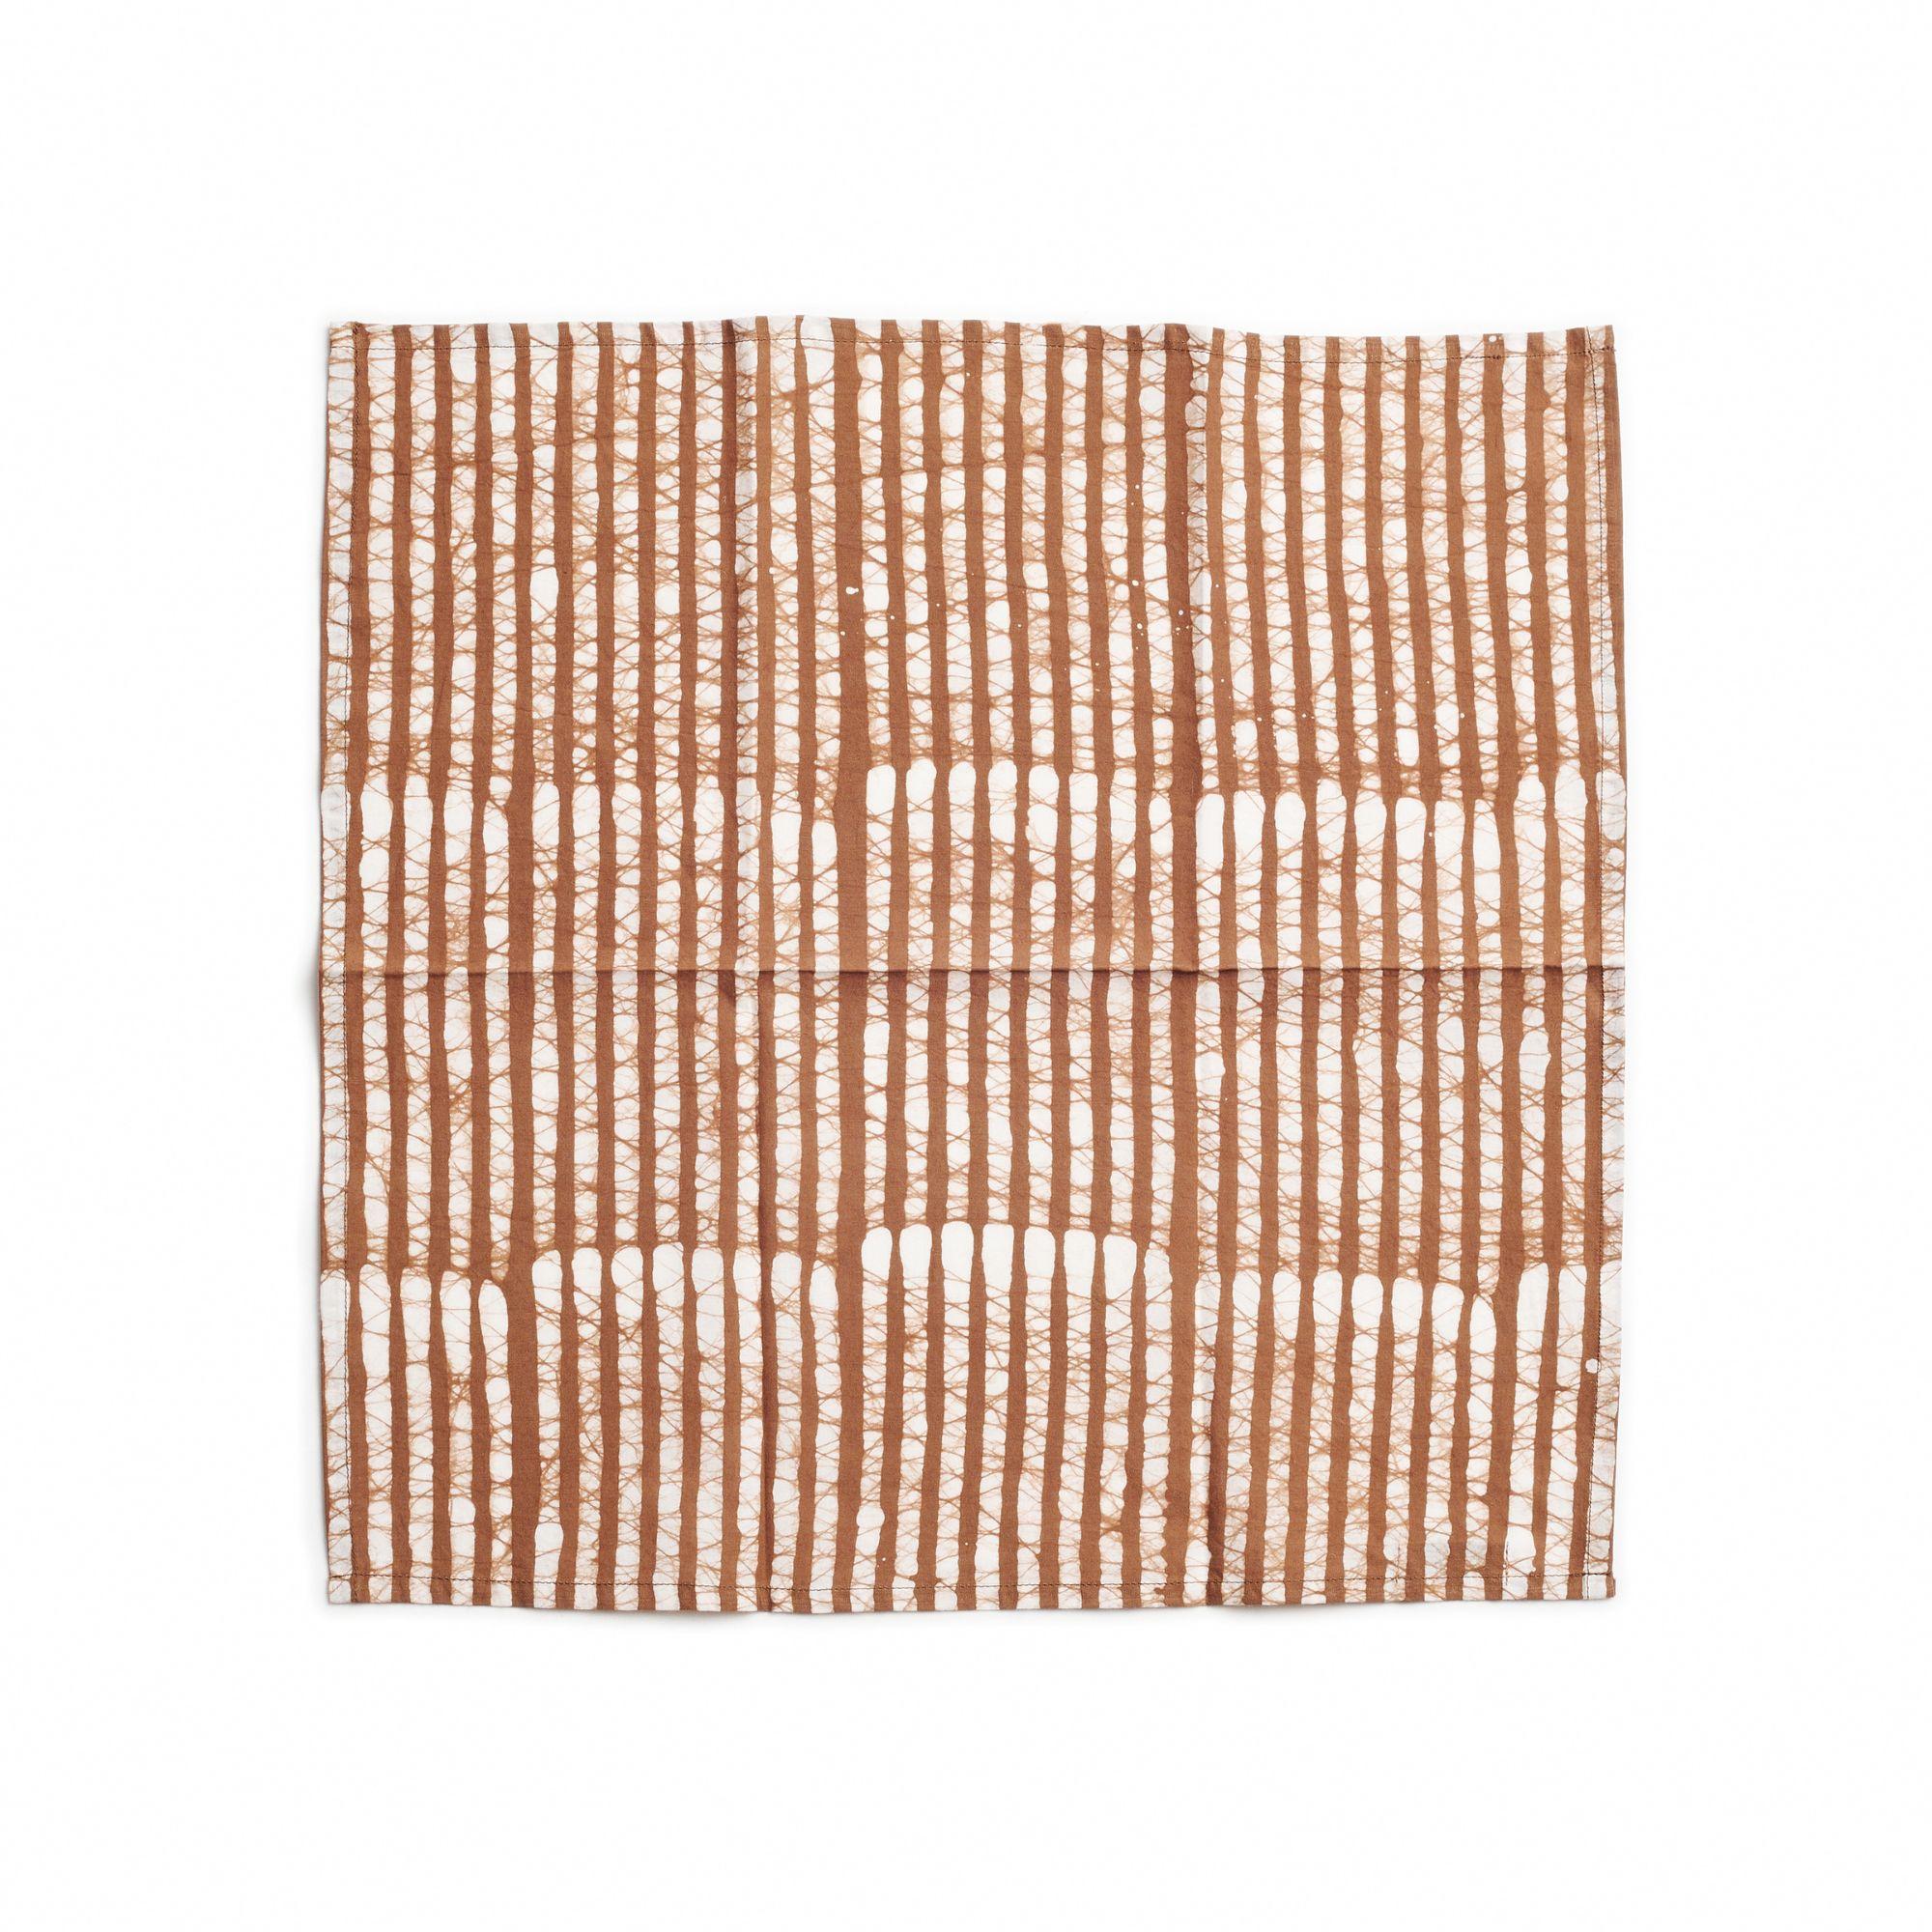 Oak Brown table napkin is a unique modern artisanal napkin. Created artistically and ethically by artisans in India using wax block print technique, using only pure natural dyes. It is a pure statement piece that adds modern and timeless quality as 